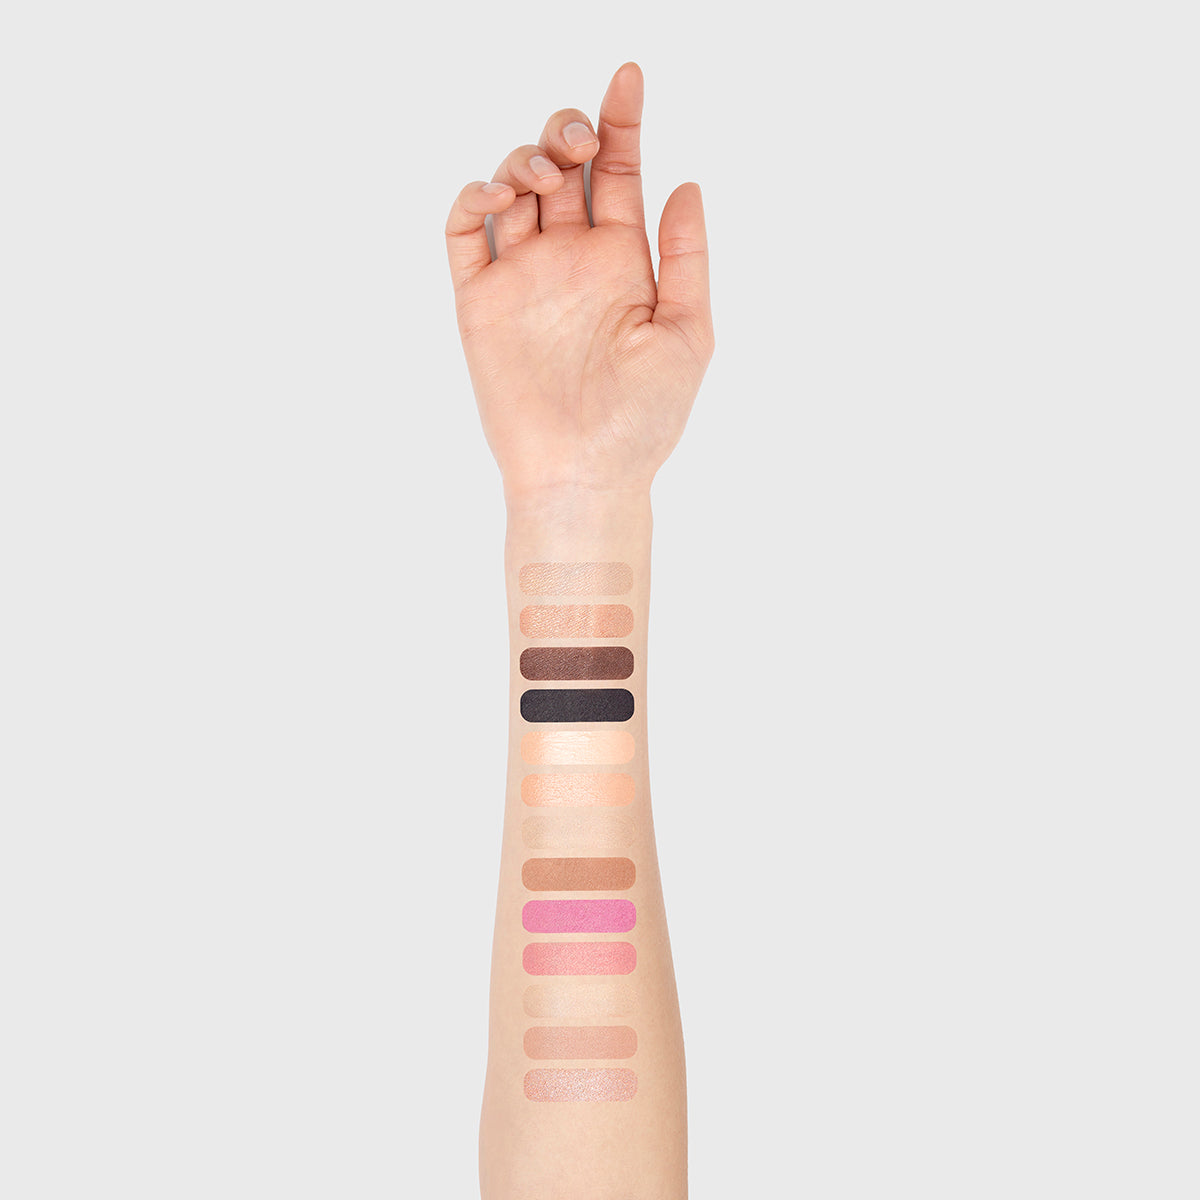 a photo of a light-skinned woman's arm with 13 swatches showing all 13 cosmetics that are found in the fold out face #1 light palette